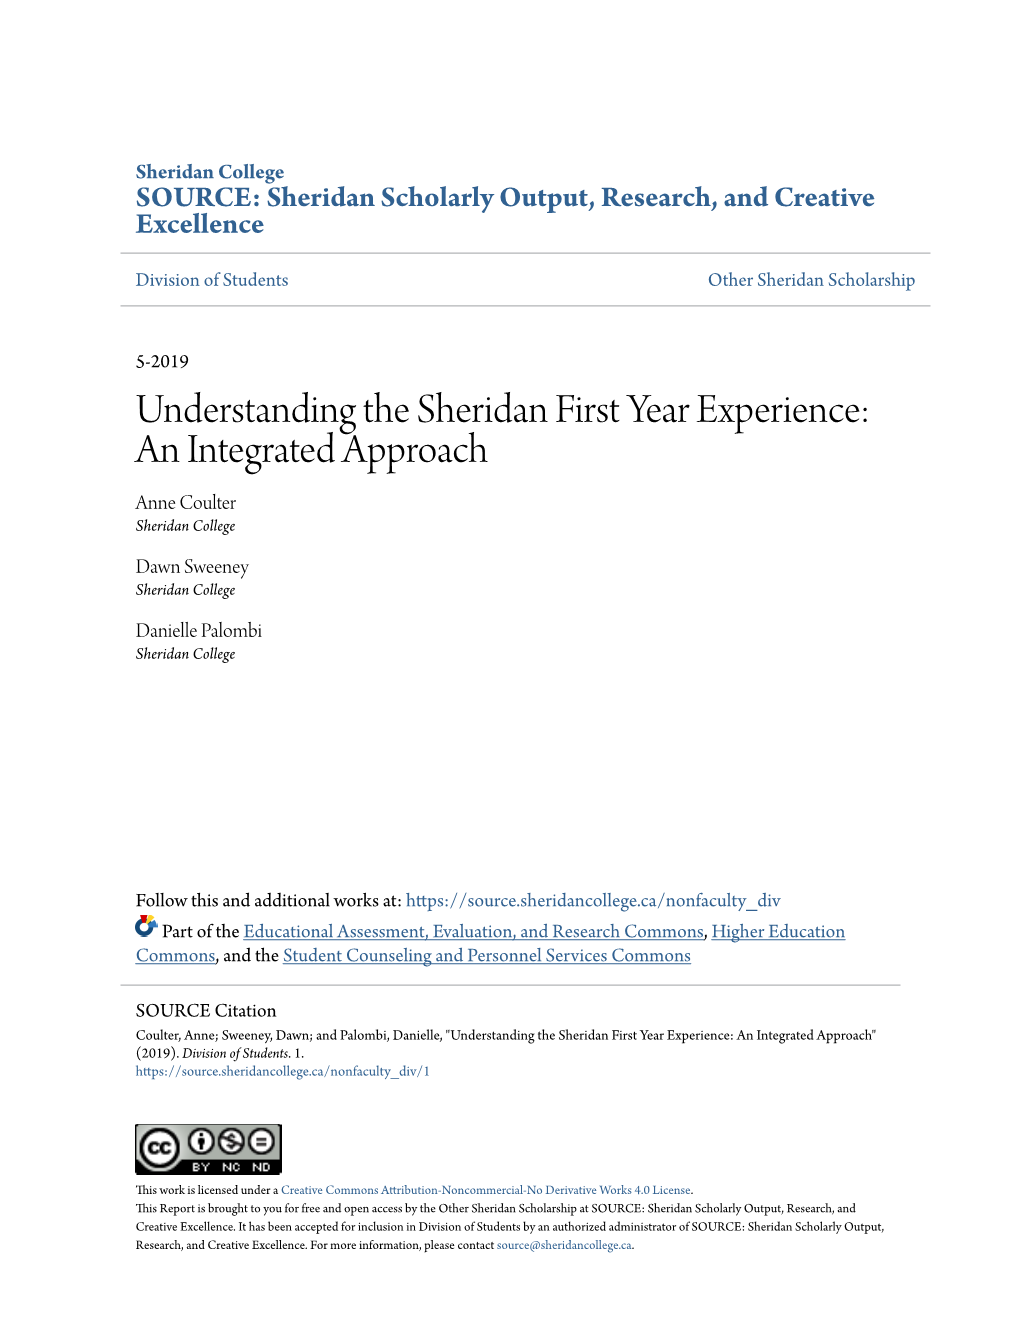 Understanding the Sheridan First Year Experience: an Integrated Approach Anne Coulter Sheridan College